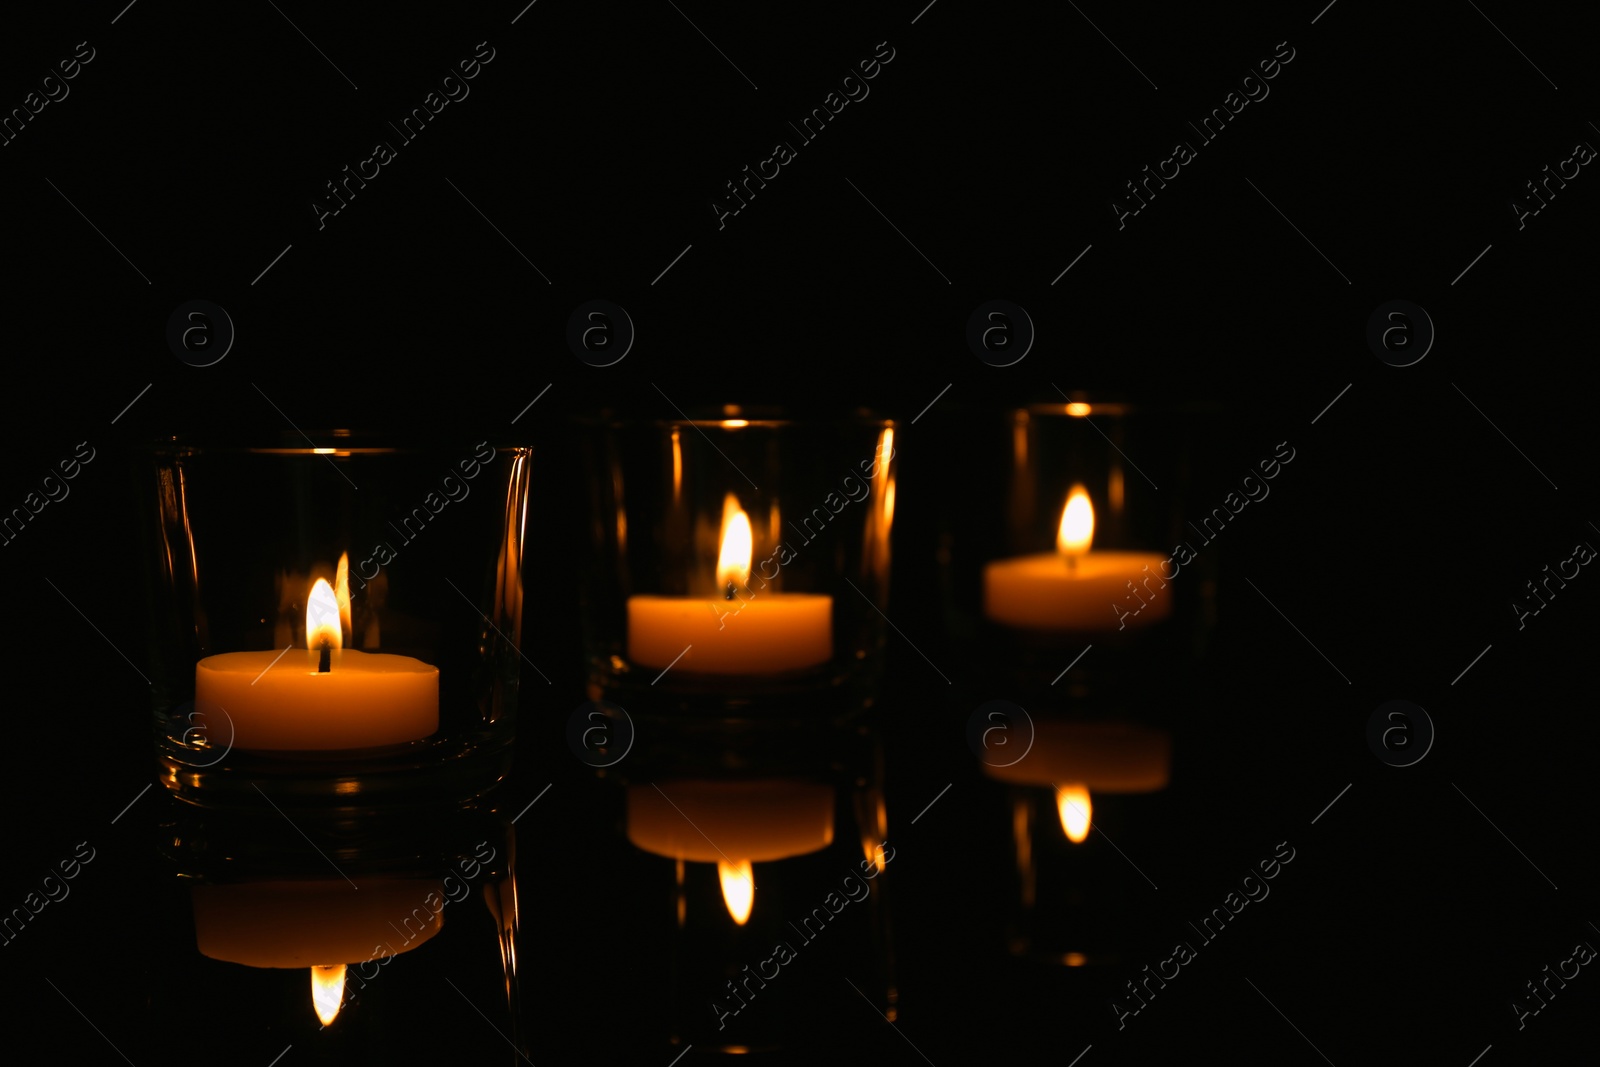 Photo of Burning candles in glass holders on table against dark background